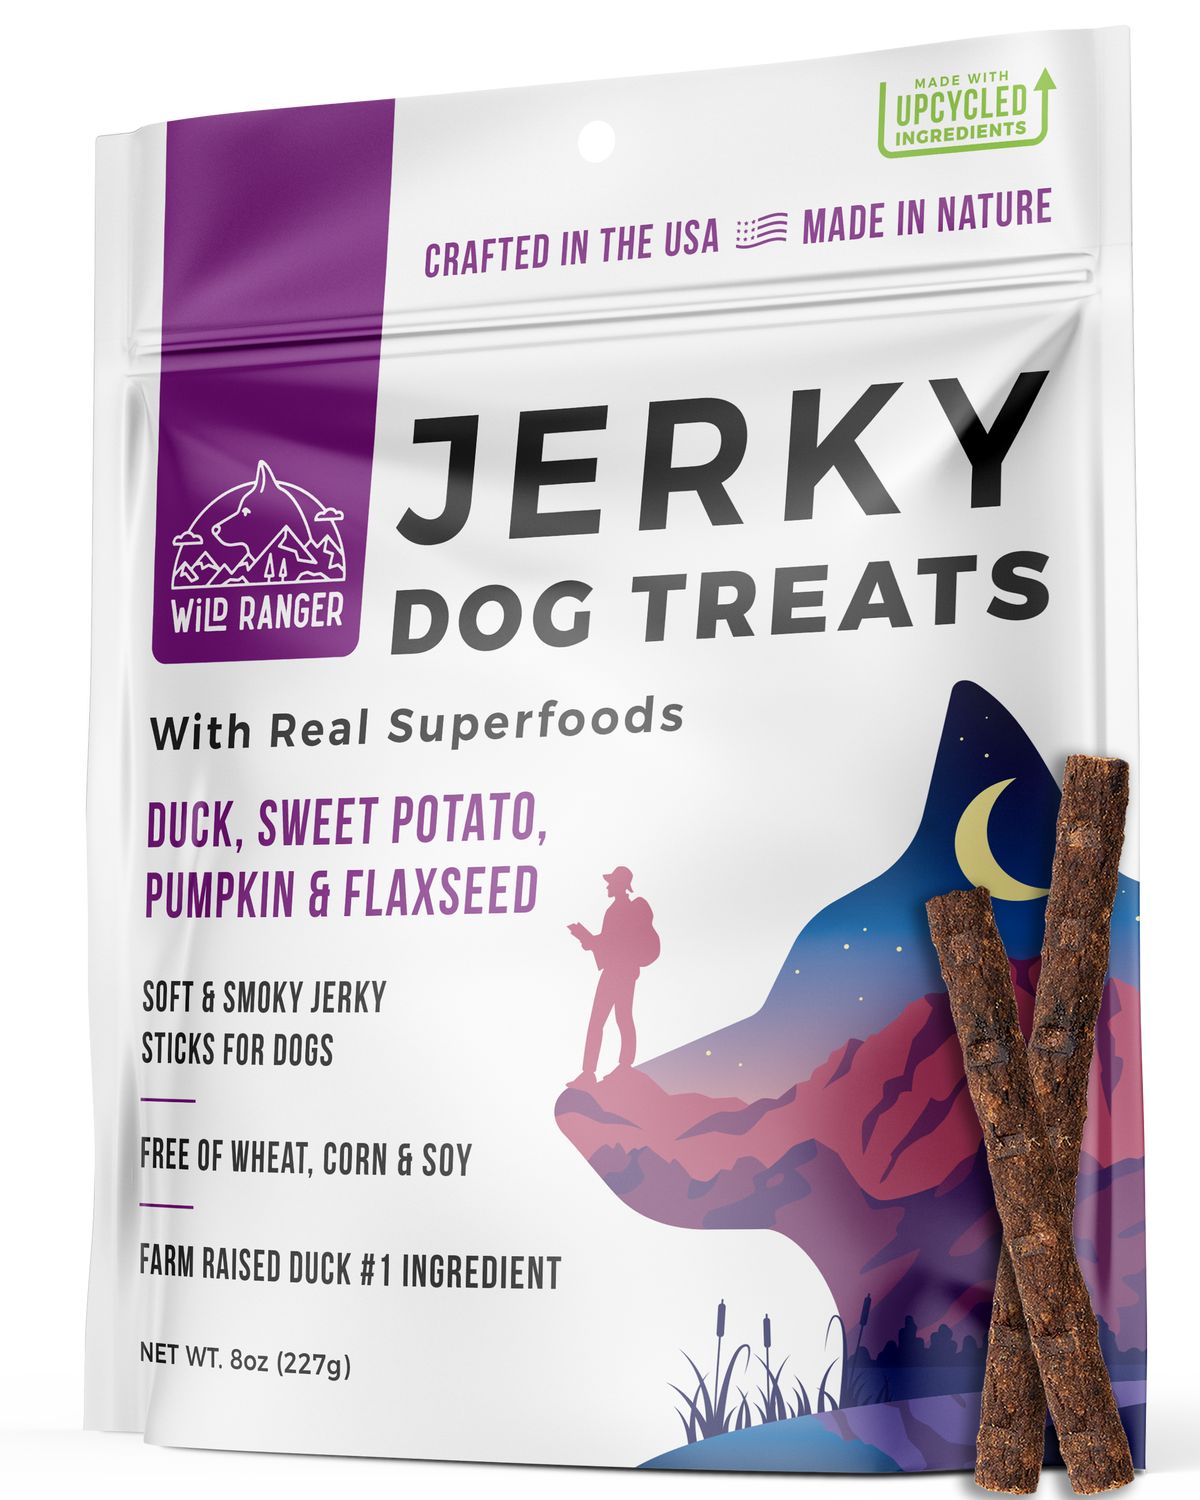 Wild Ranger Jerky Dog Treats - Beef, Duck, and Chicken Superfood Variety Pack - 3 Bags (1.5 LBS)